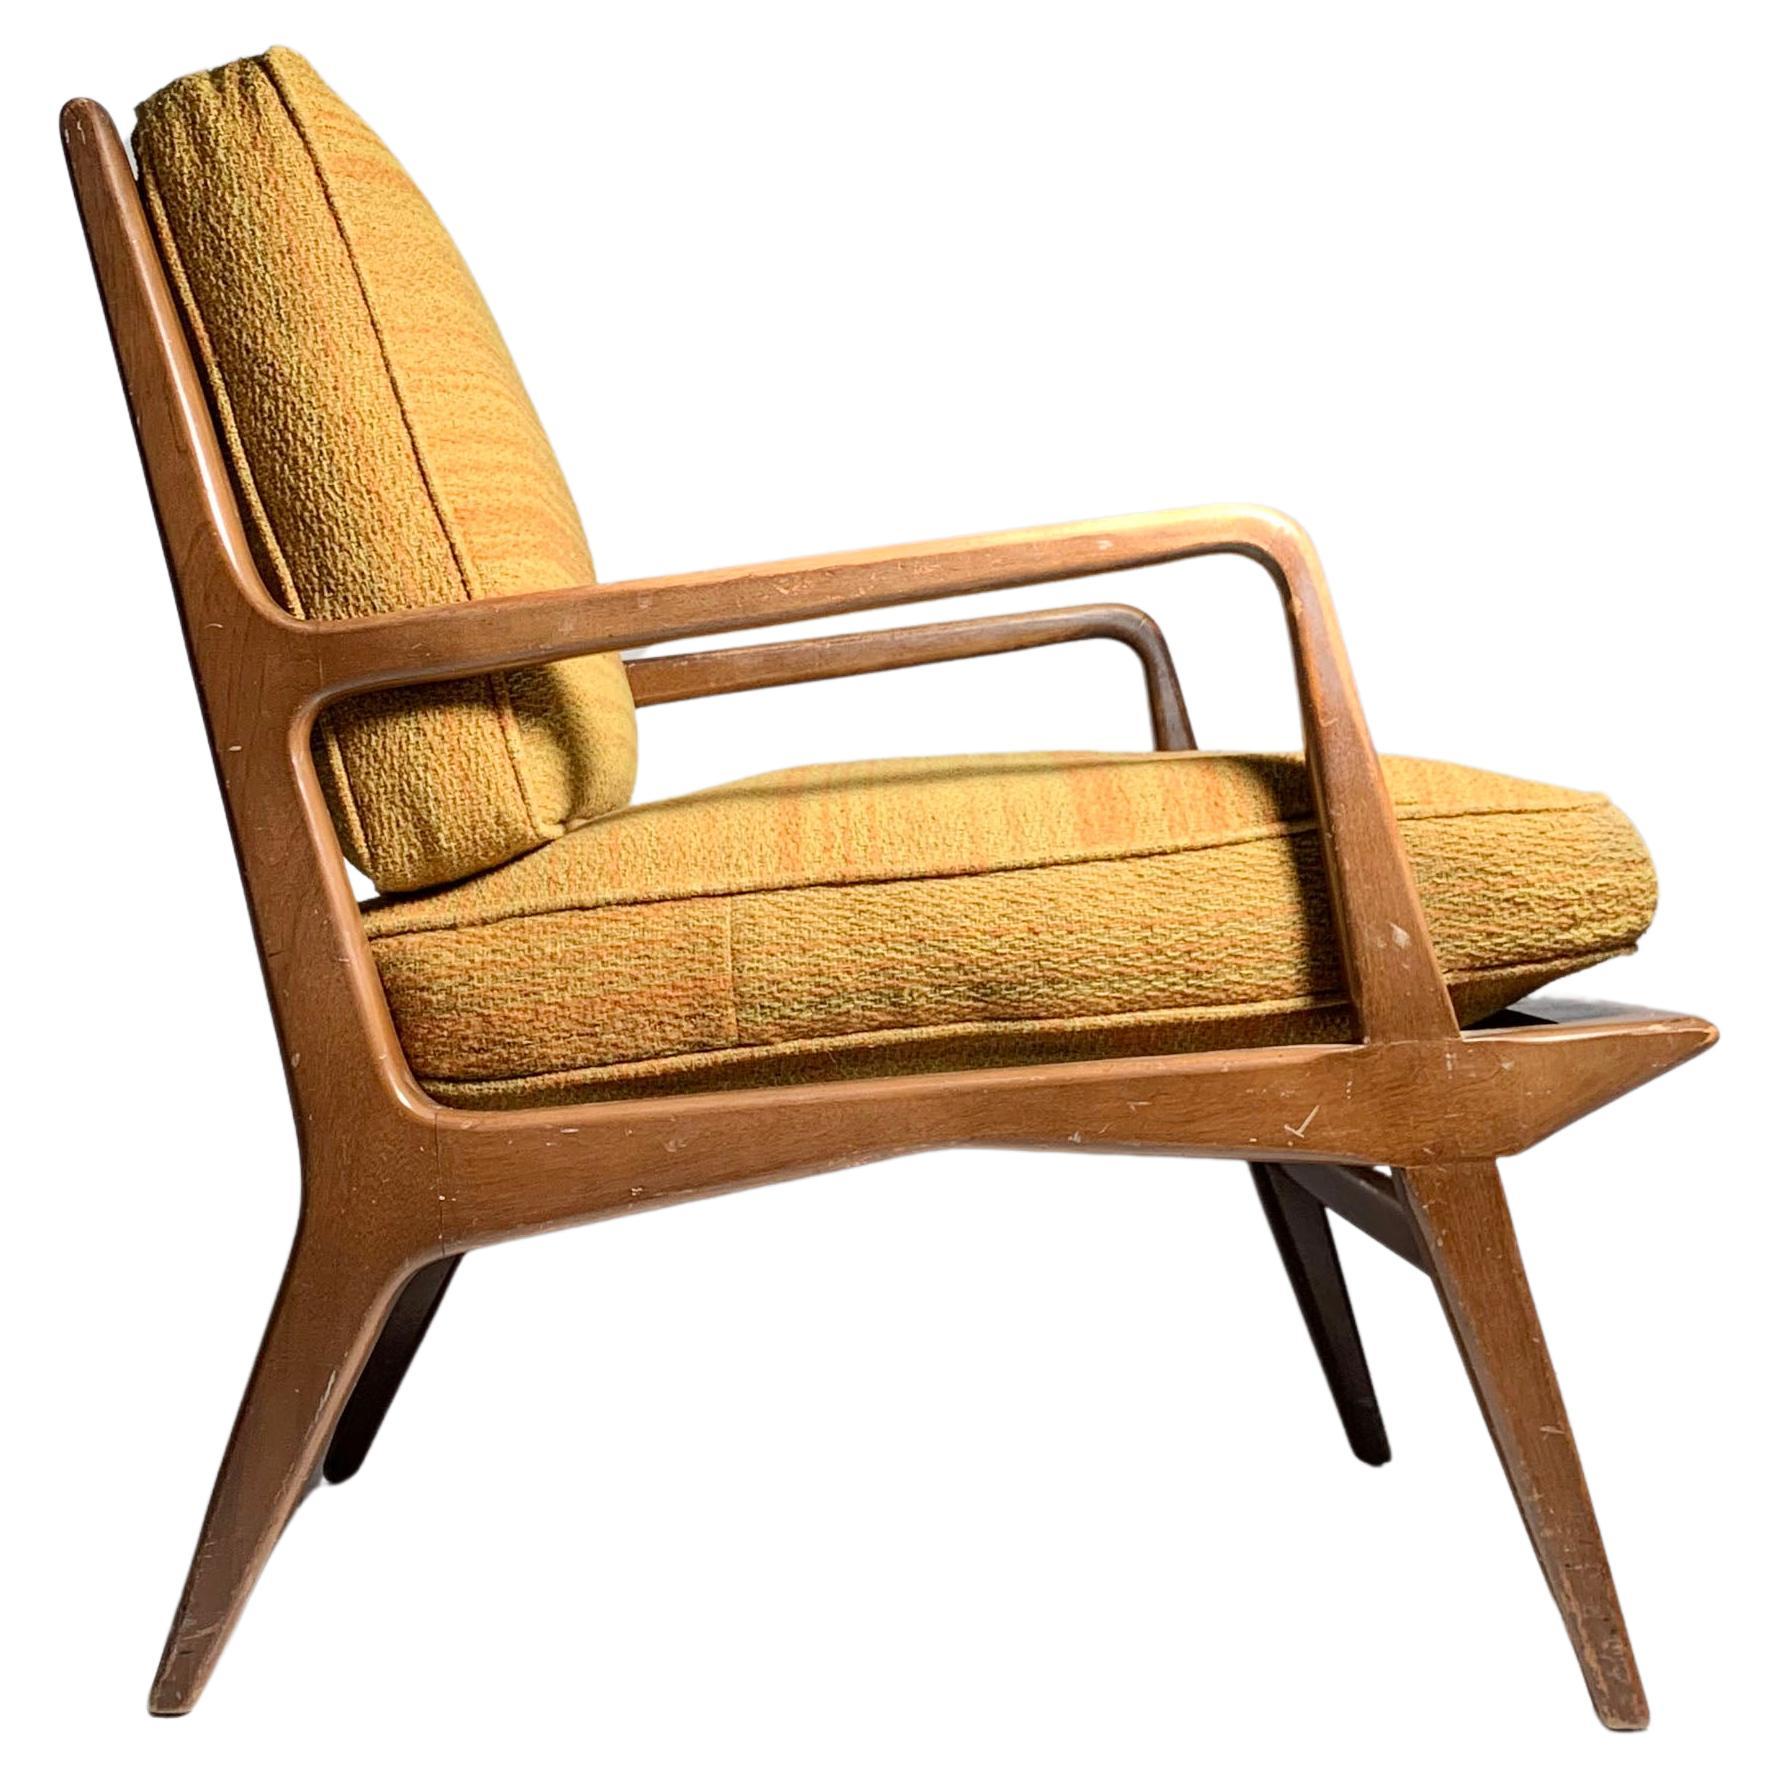  Vintage Lounge Chair design by Carlo di Carli For Sale